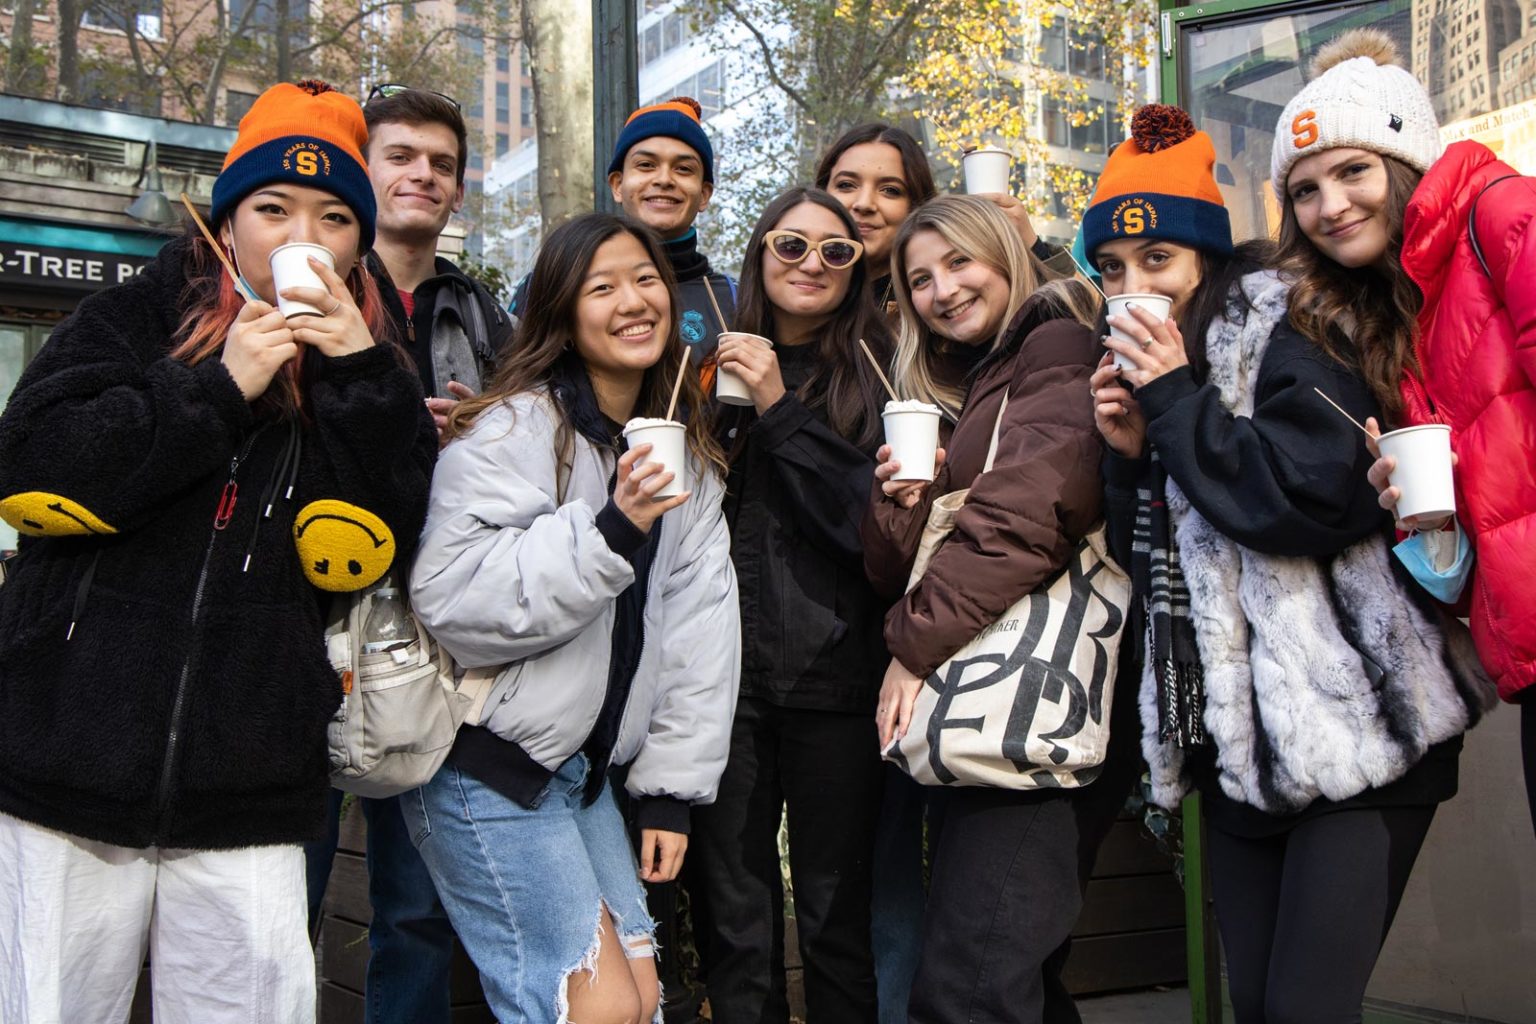 Newhouse NYC students enjoying Bryant Park in the fall. Photo by Sarah Lee.